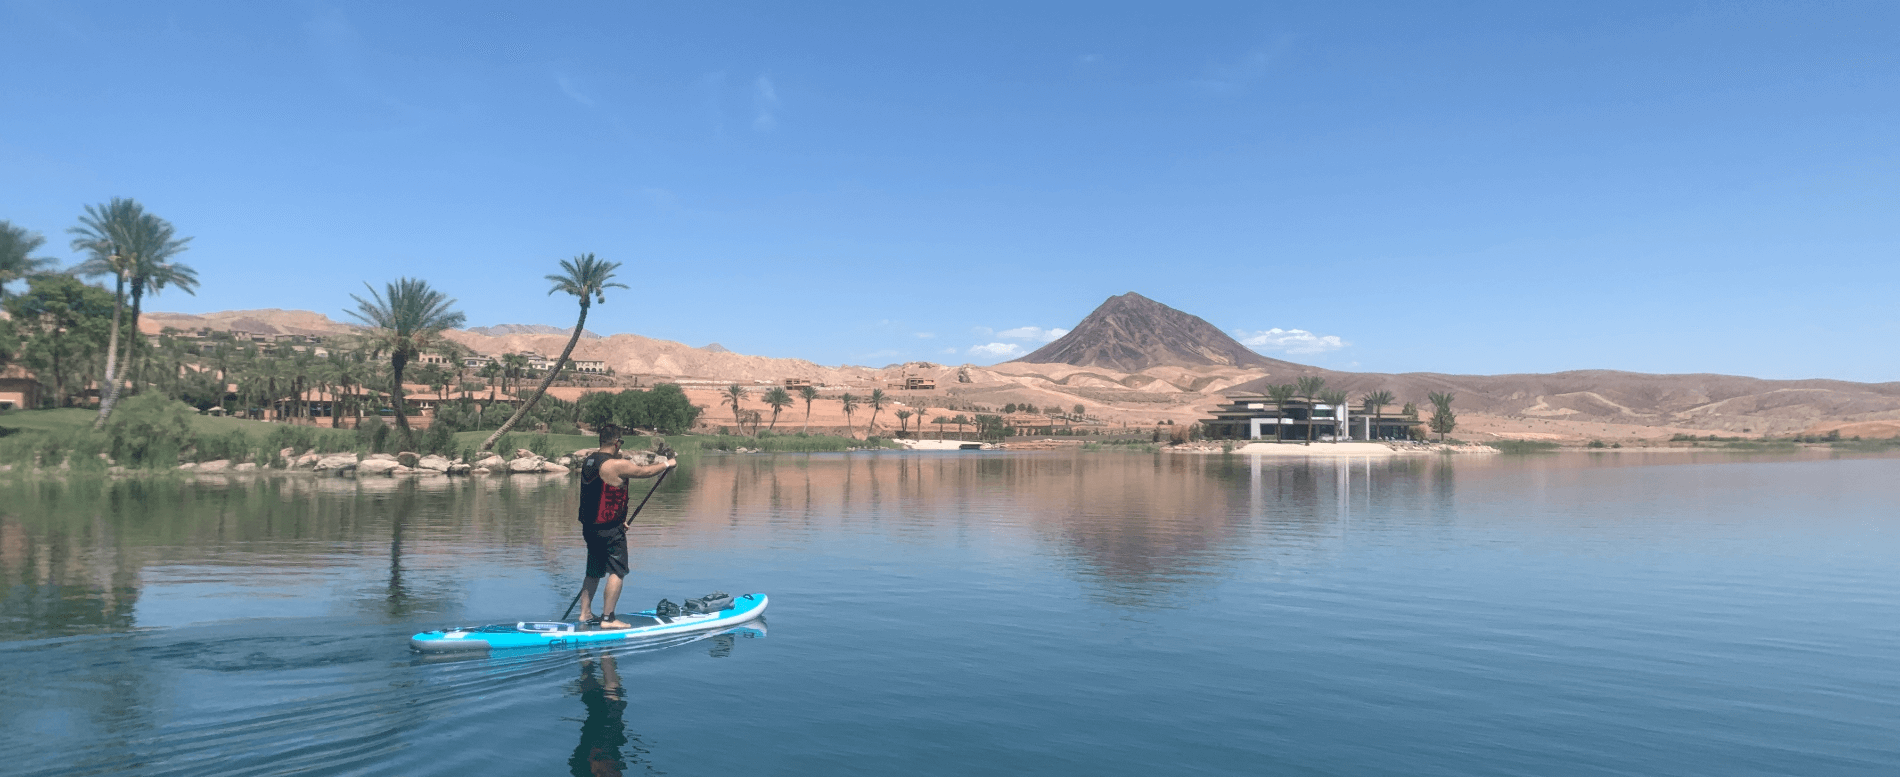 The Best Life Jackets (PFDs) for Paddle Boarding (SUP) in 2023